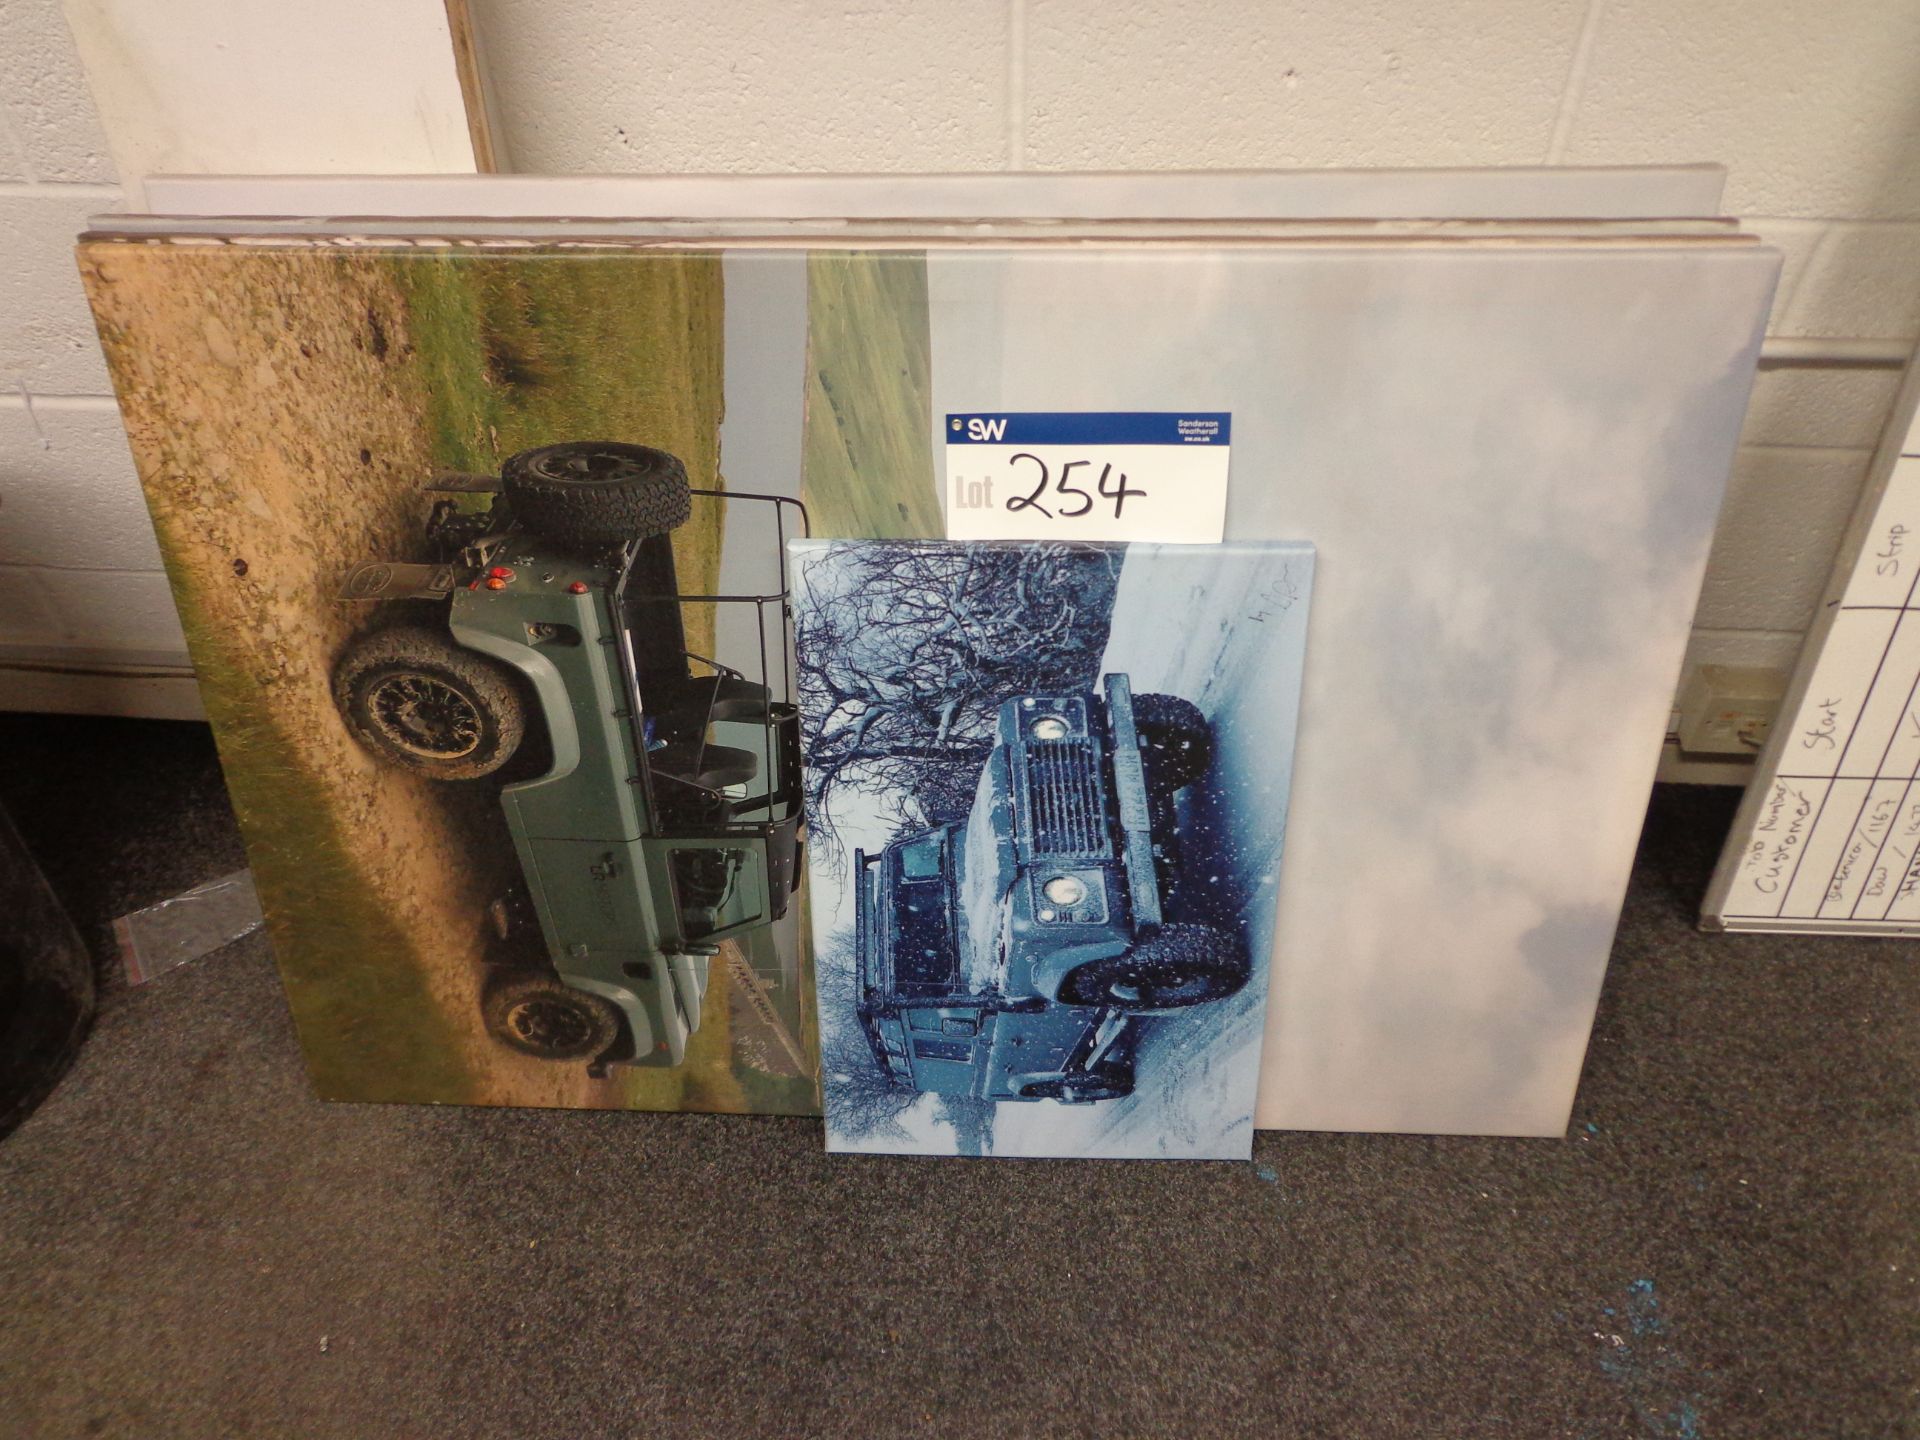 5 LAND ROVER Display PrintsPlease read the following important notes:- ***Overseas buyers - All lots